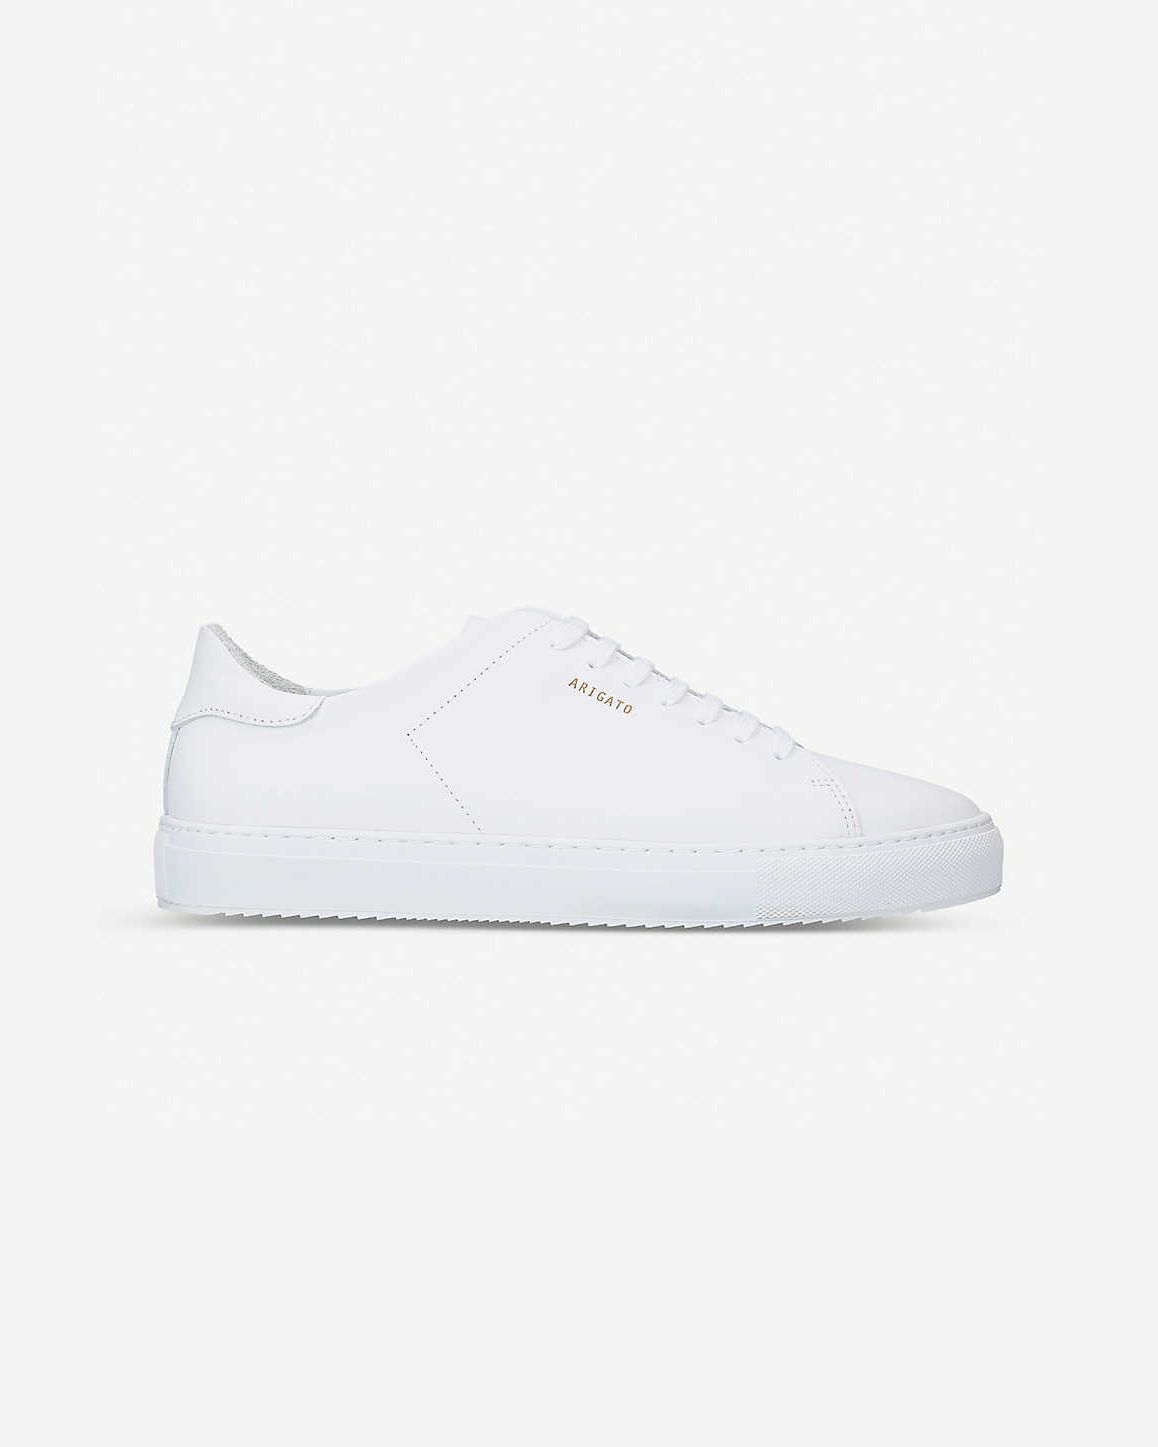 white trainers womens leather